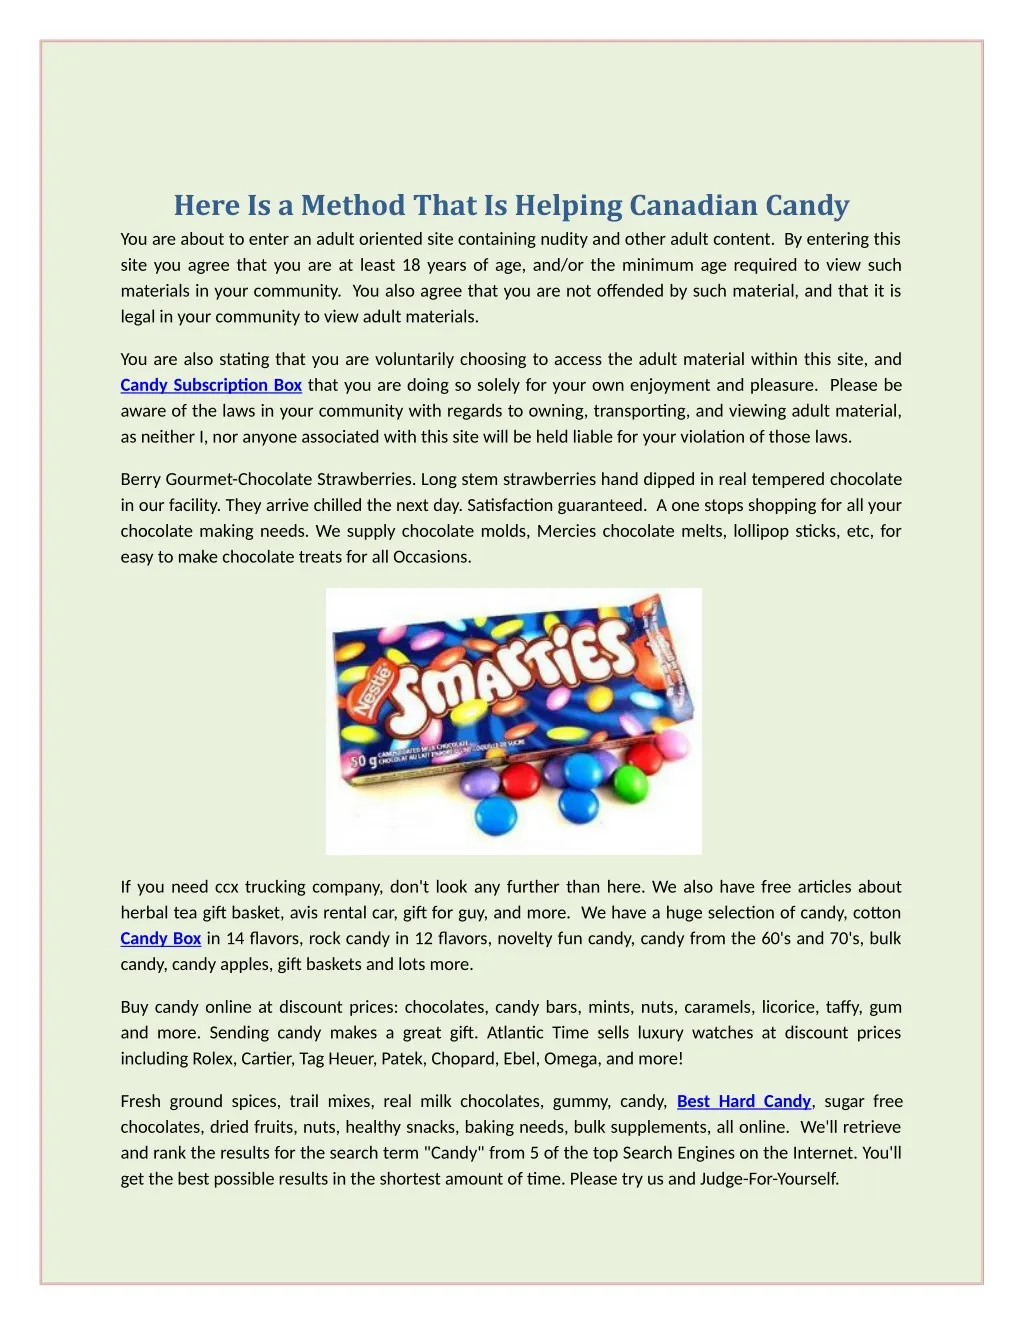 here is a method that is helping canadian candy